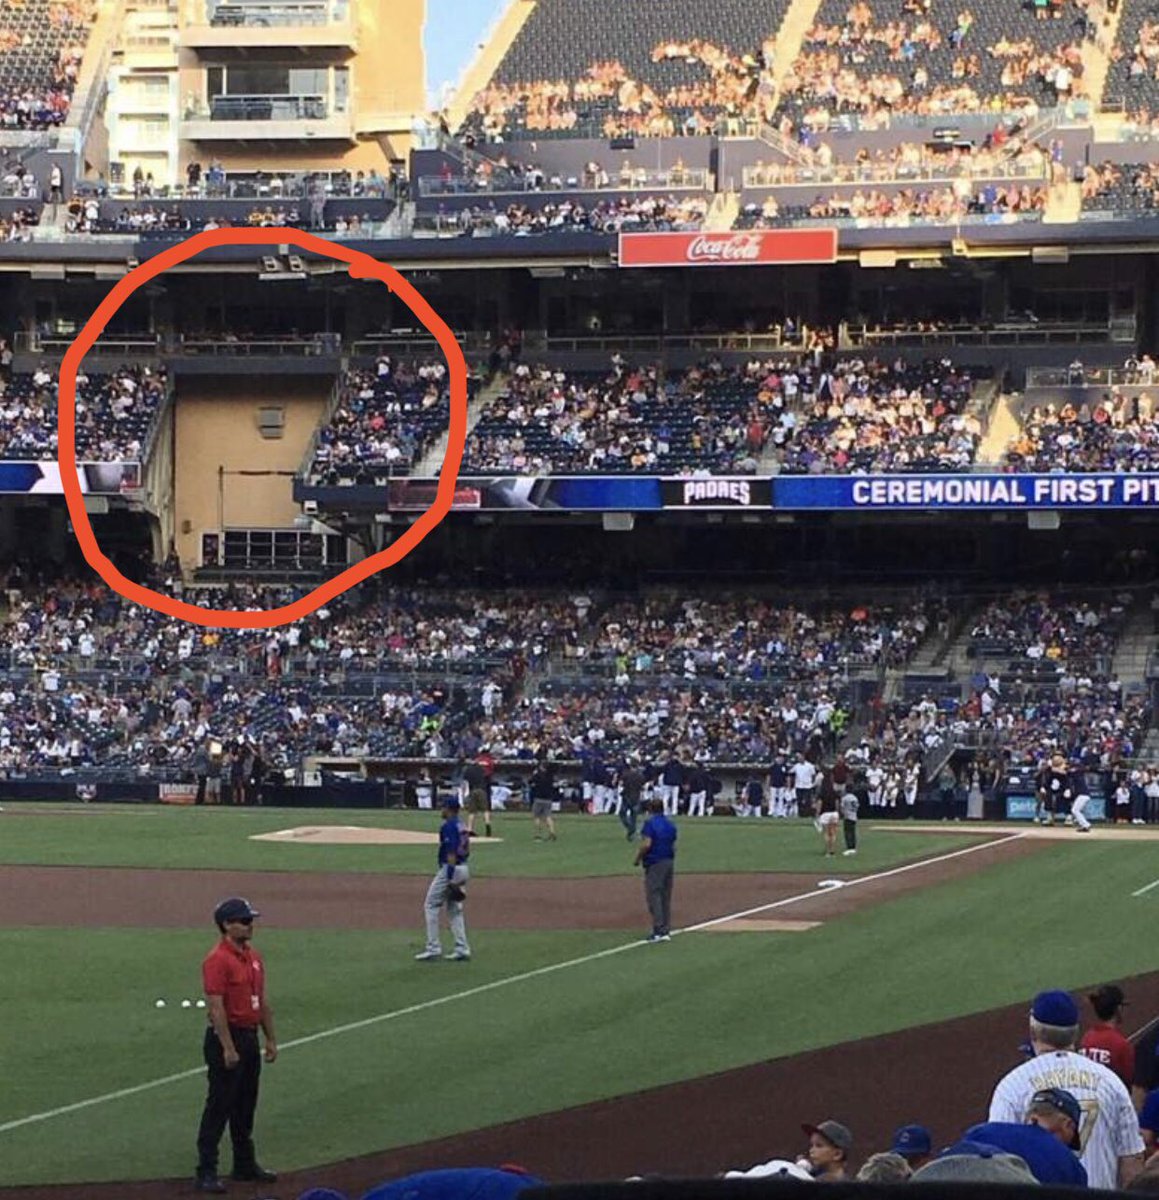 Worst: Petco Park. Never been a fan of unnecessary gaps in the grandstand. Actually it helps separate really expensive seats from expensive seats, but isn’t a good aesthetic IMO.